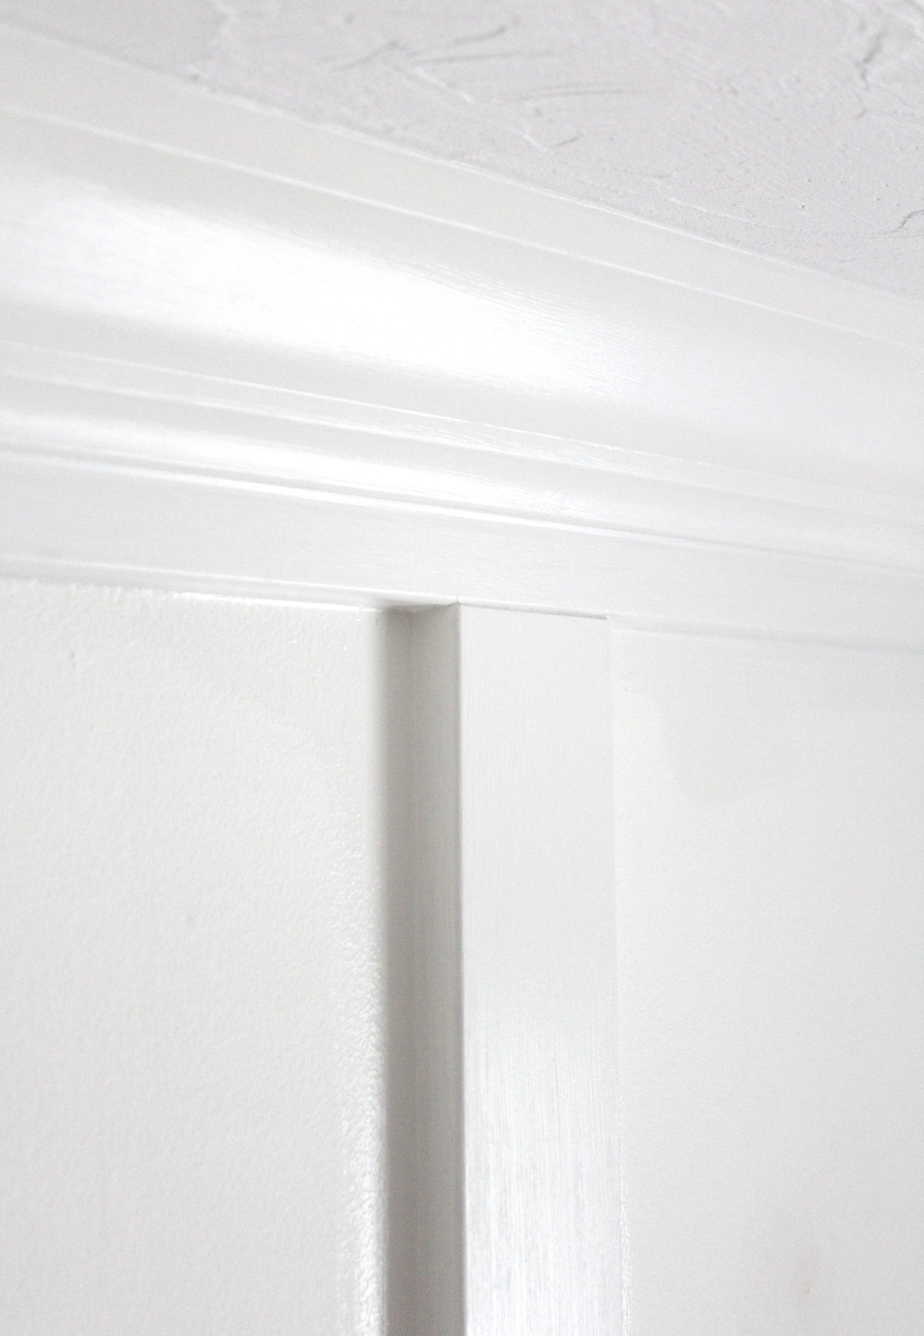 Crown moulding installed over a 2" base gives the finished product a more dramatic feel.